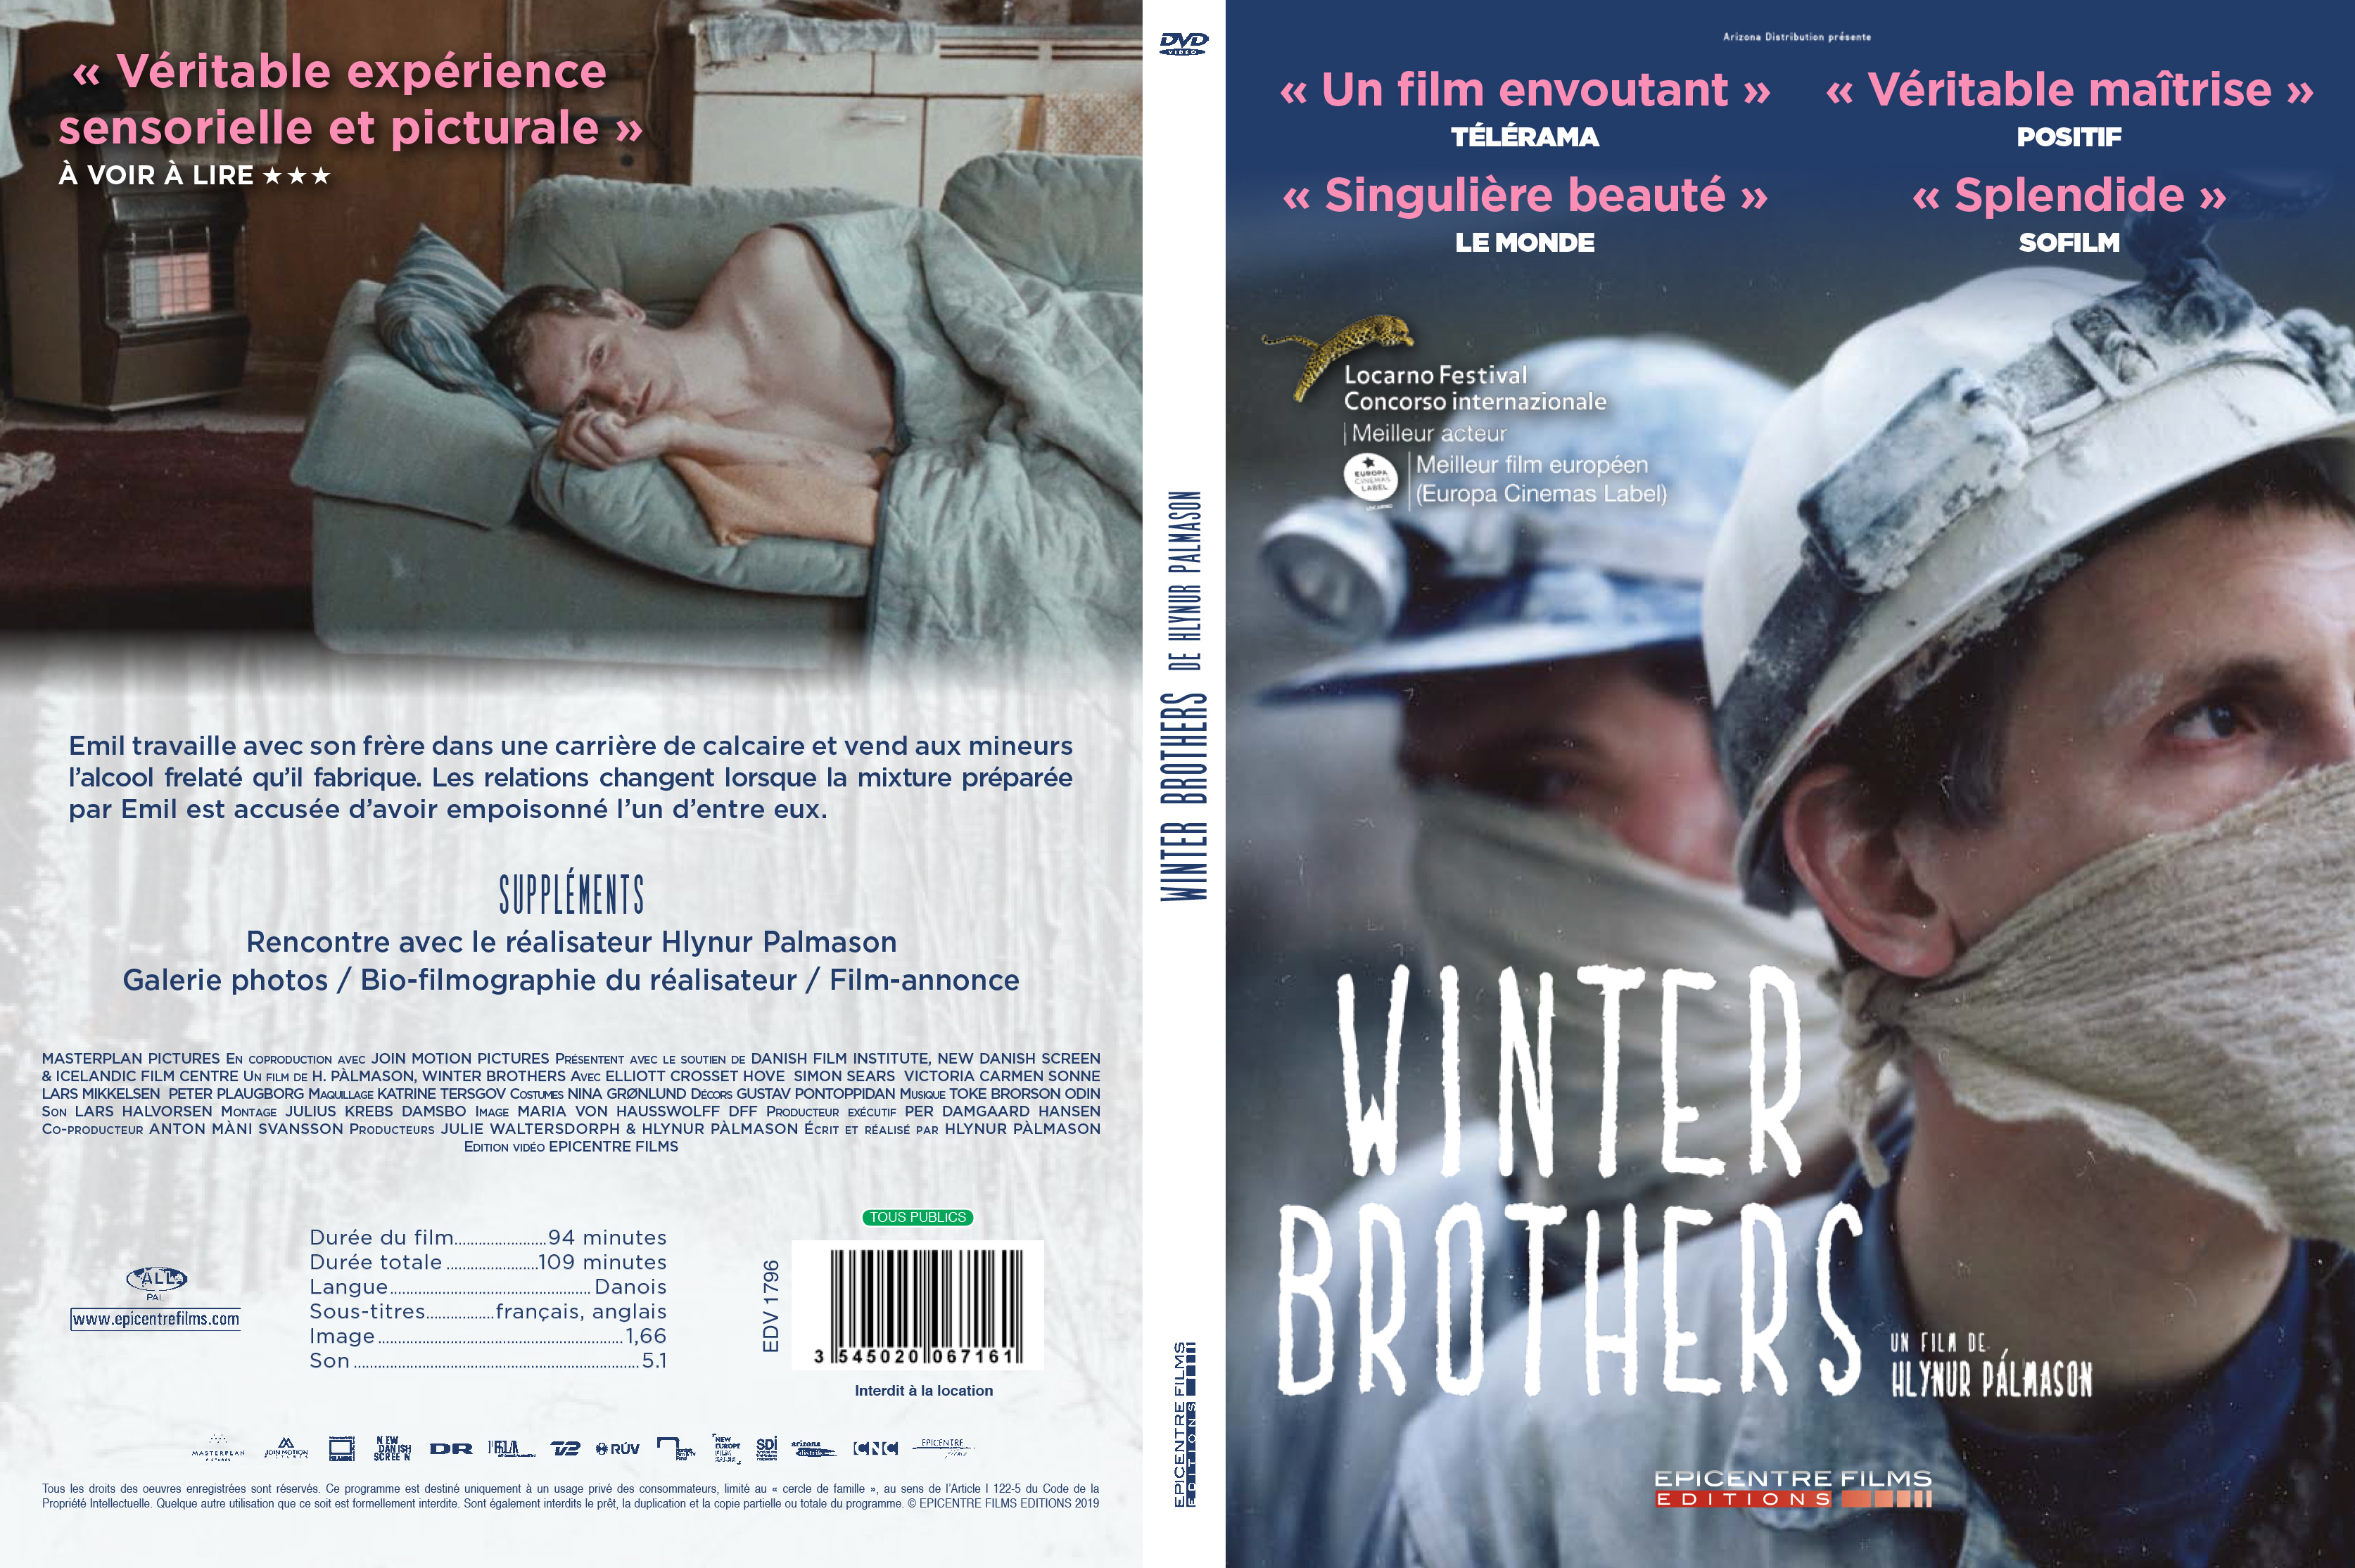 Jaquette DVD Winter Brothers